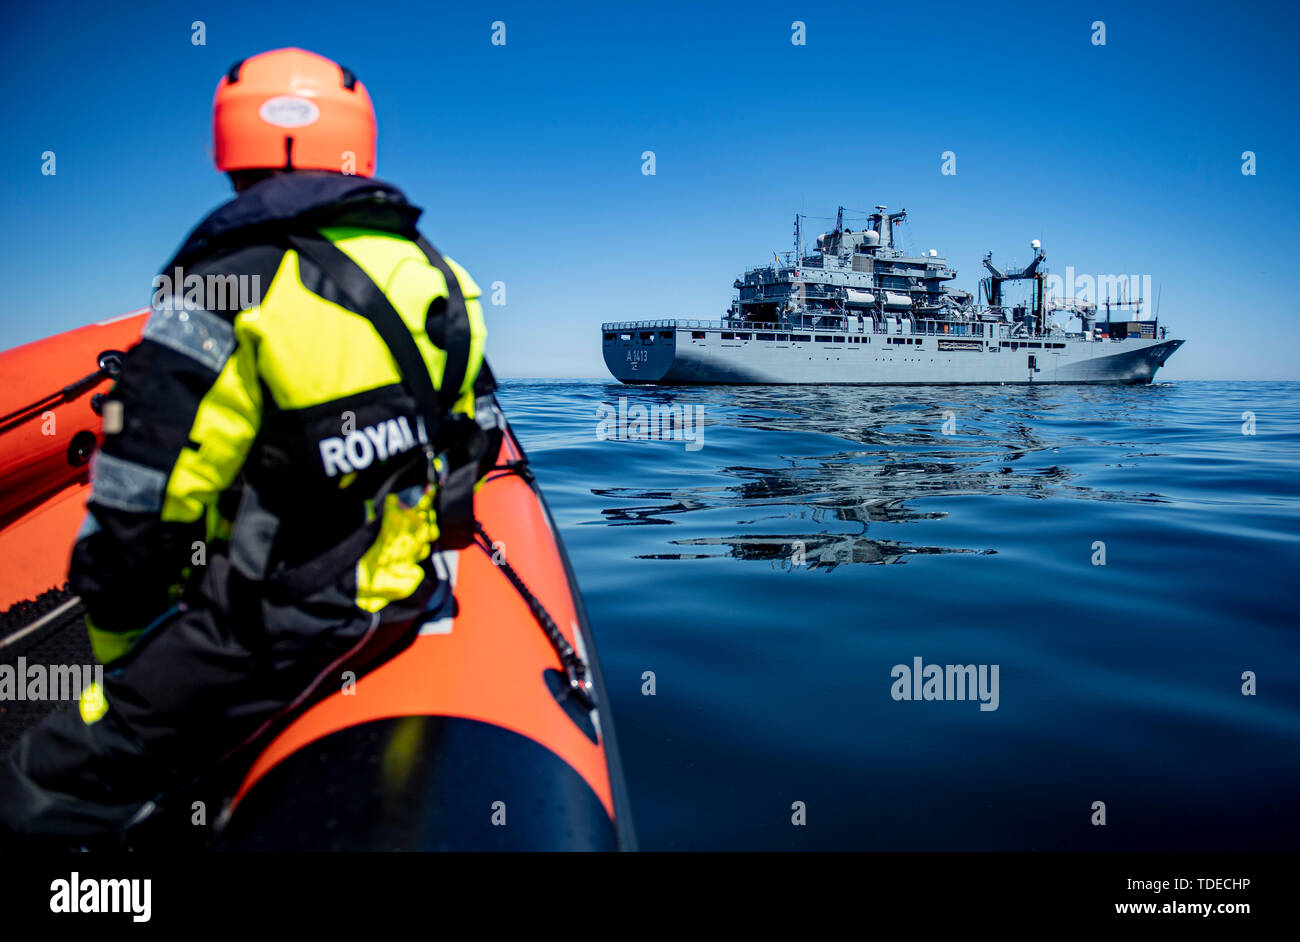 Bornholm, Denmark. 14th June, 2019. A speedboat of the Royal Danish Navy is approaching the task force supplier 'Bonn', which operates near the Danish island Bornholm. The ship of the German Navy takes part in the Nato manoeuvre 'Baltops' on the Baltic Sea. Credit: Axel Heimken/dpa/Alamy Live News Stock Photo